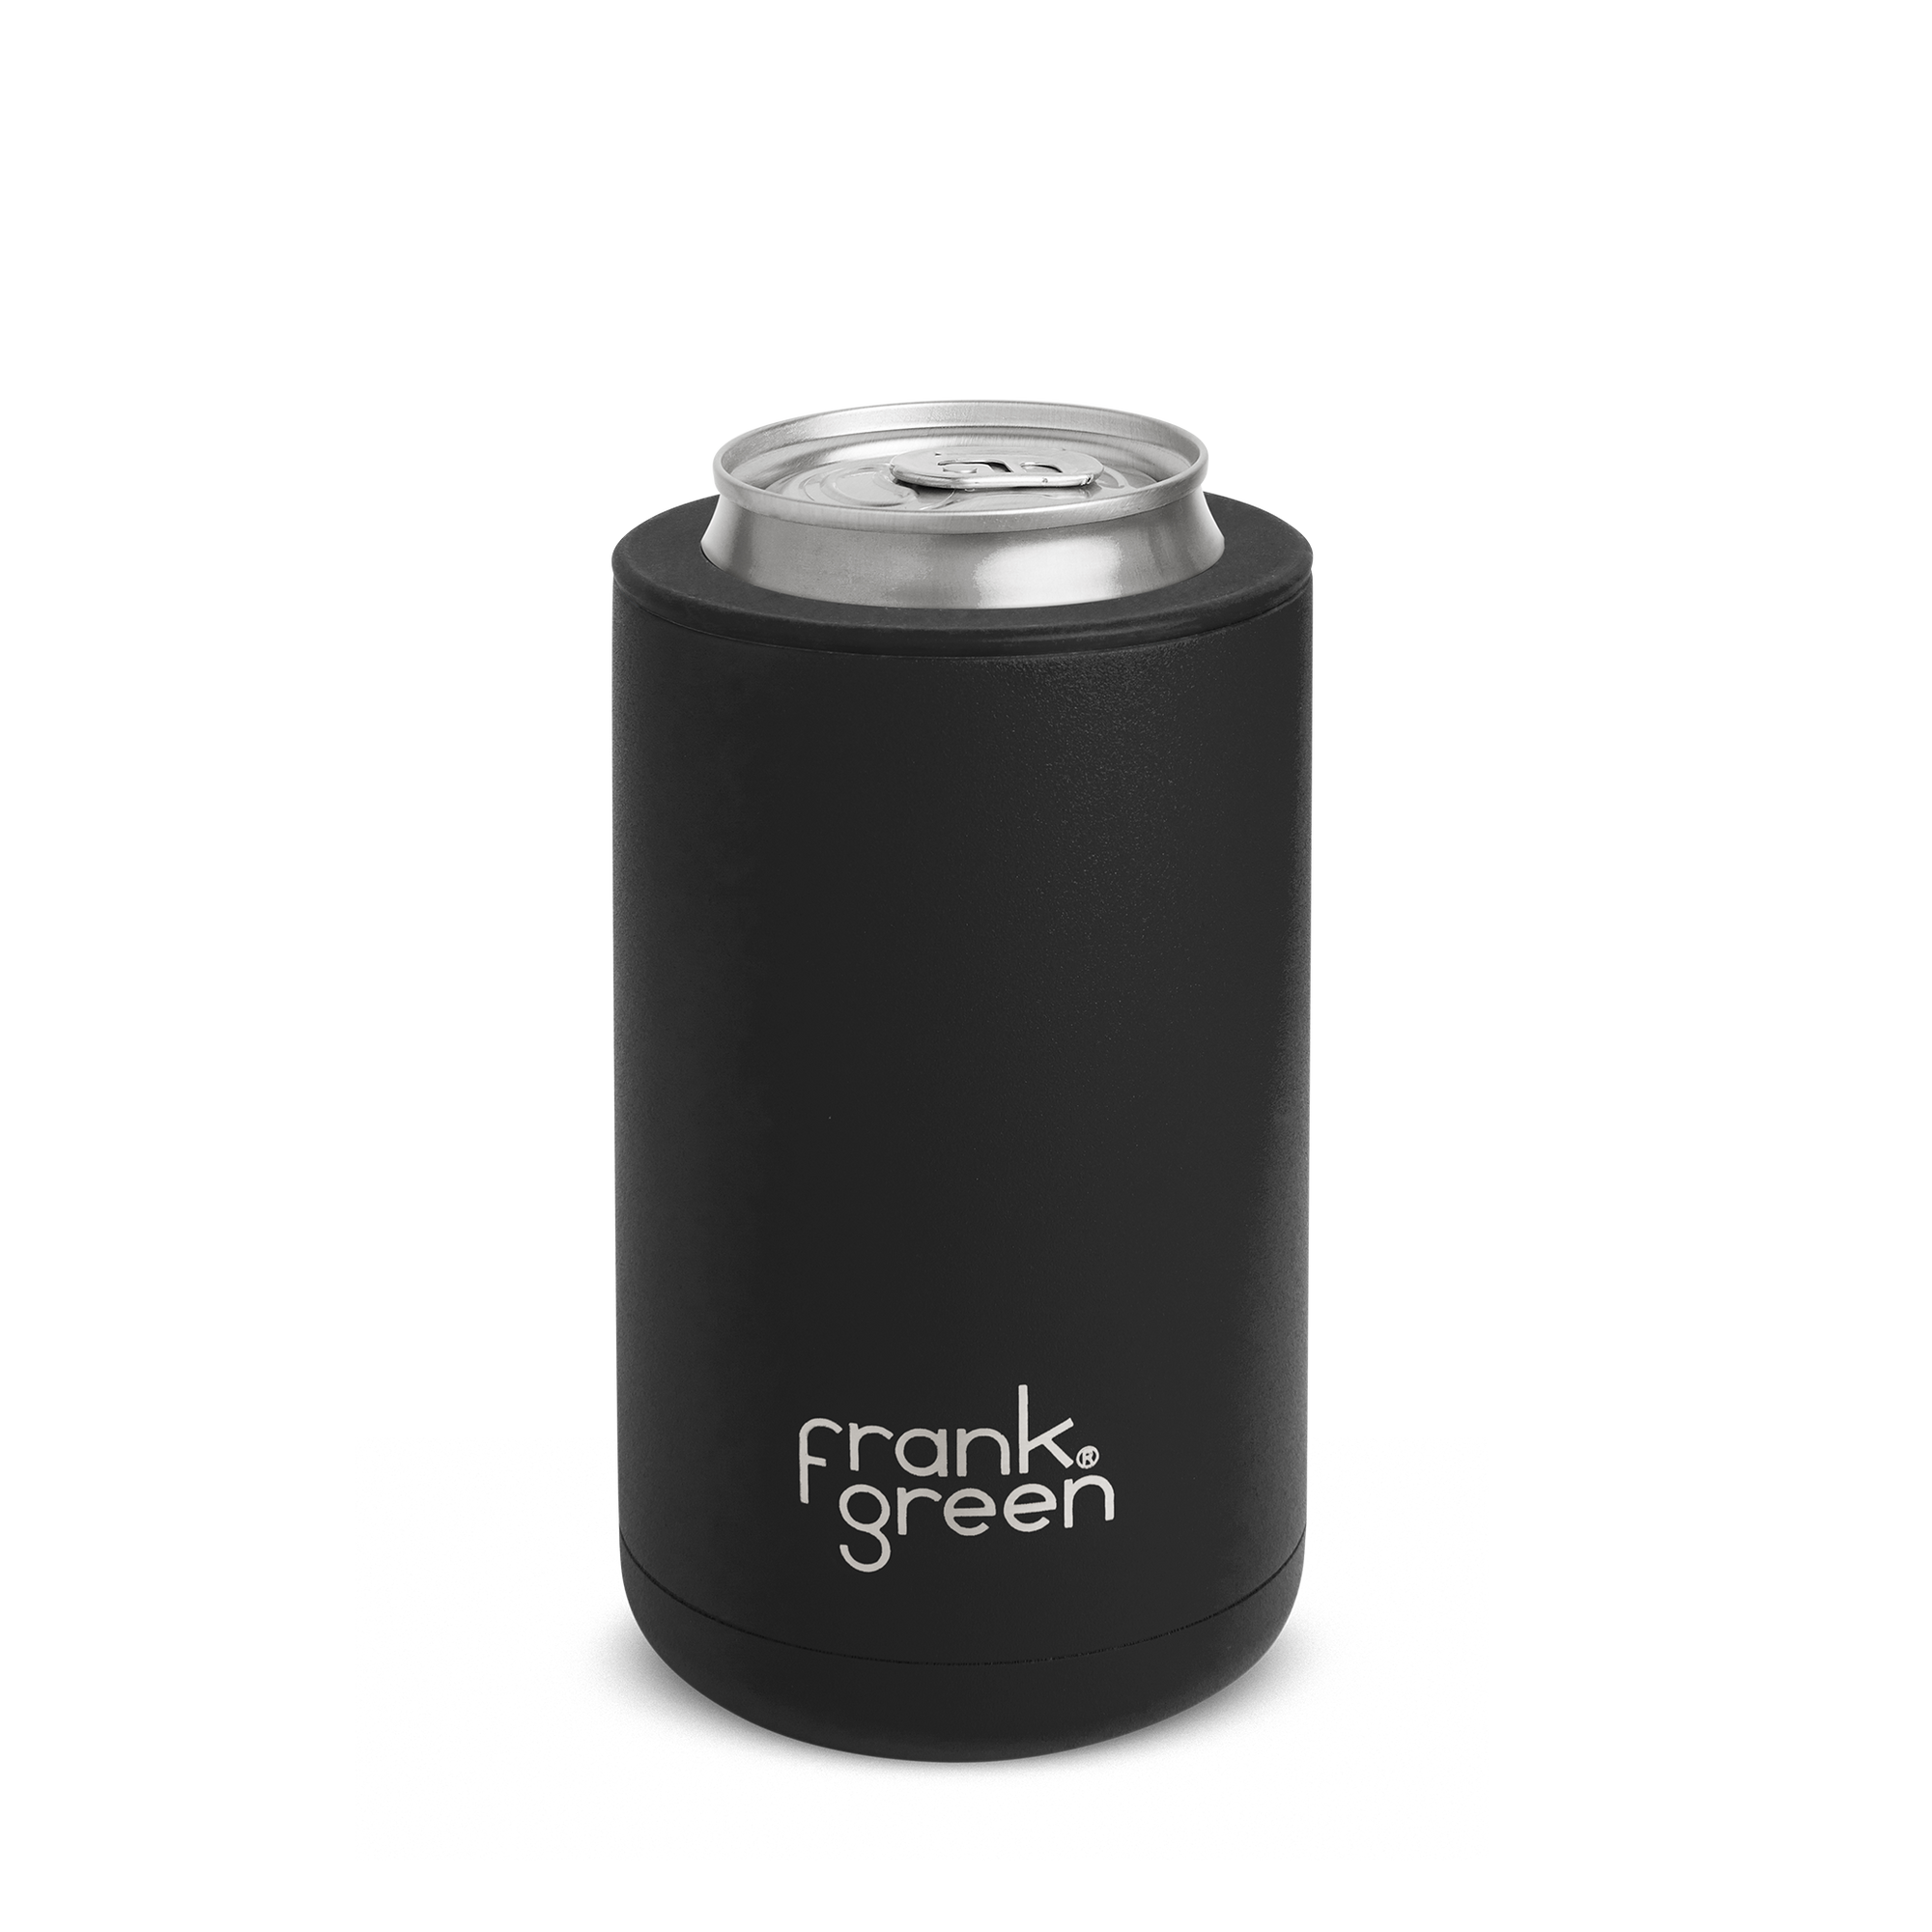 https://cdn.shopify.com/s/files/1/0030/1406/6249/products/FG_ECOMM_HIGH_RES_CORE_CUPS_3-IN-1_INSULATED_DRINK_HOLDER_BUILT_CAN_MIDNIGHT_2000x.png?v=2840112